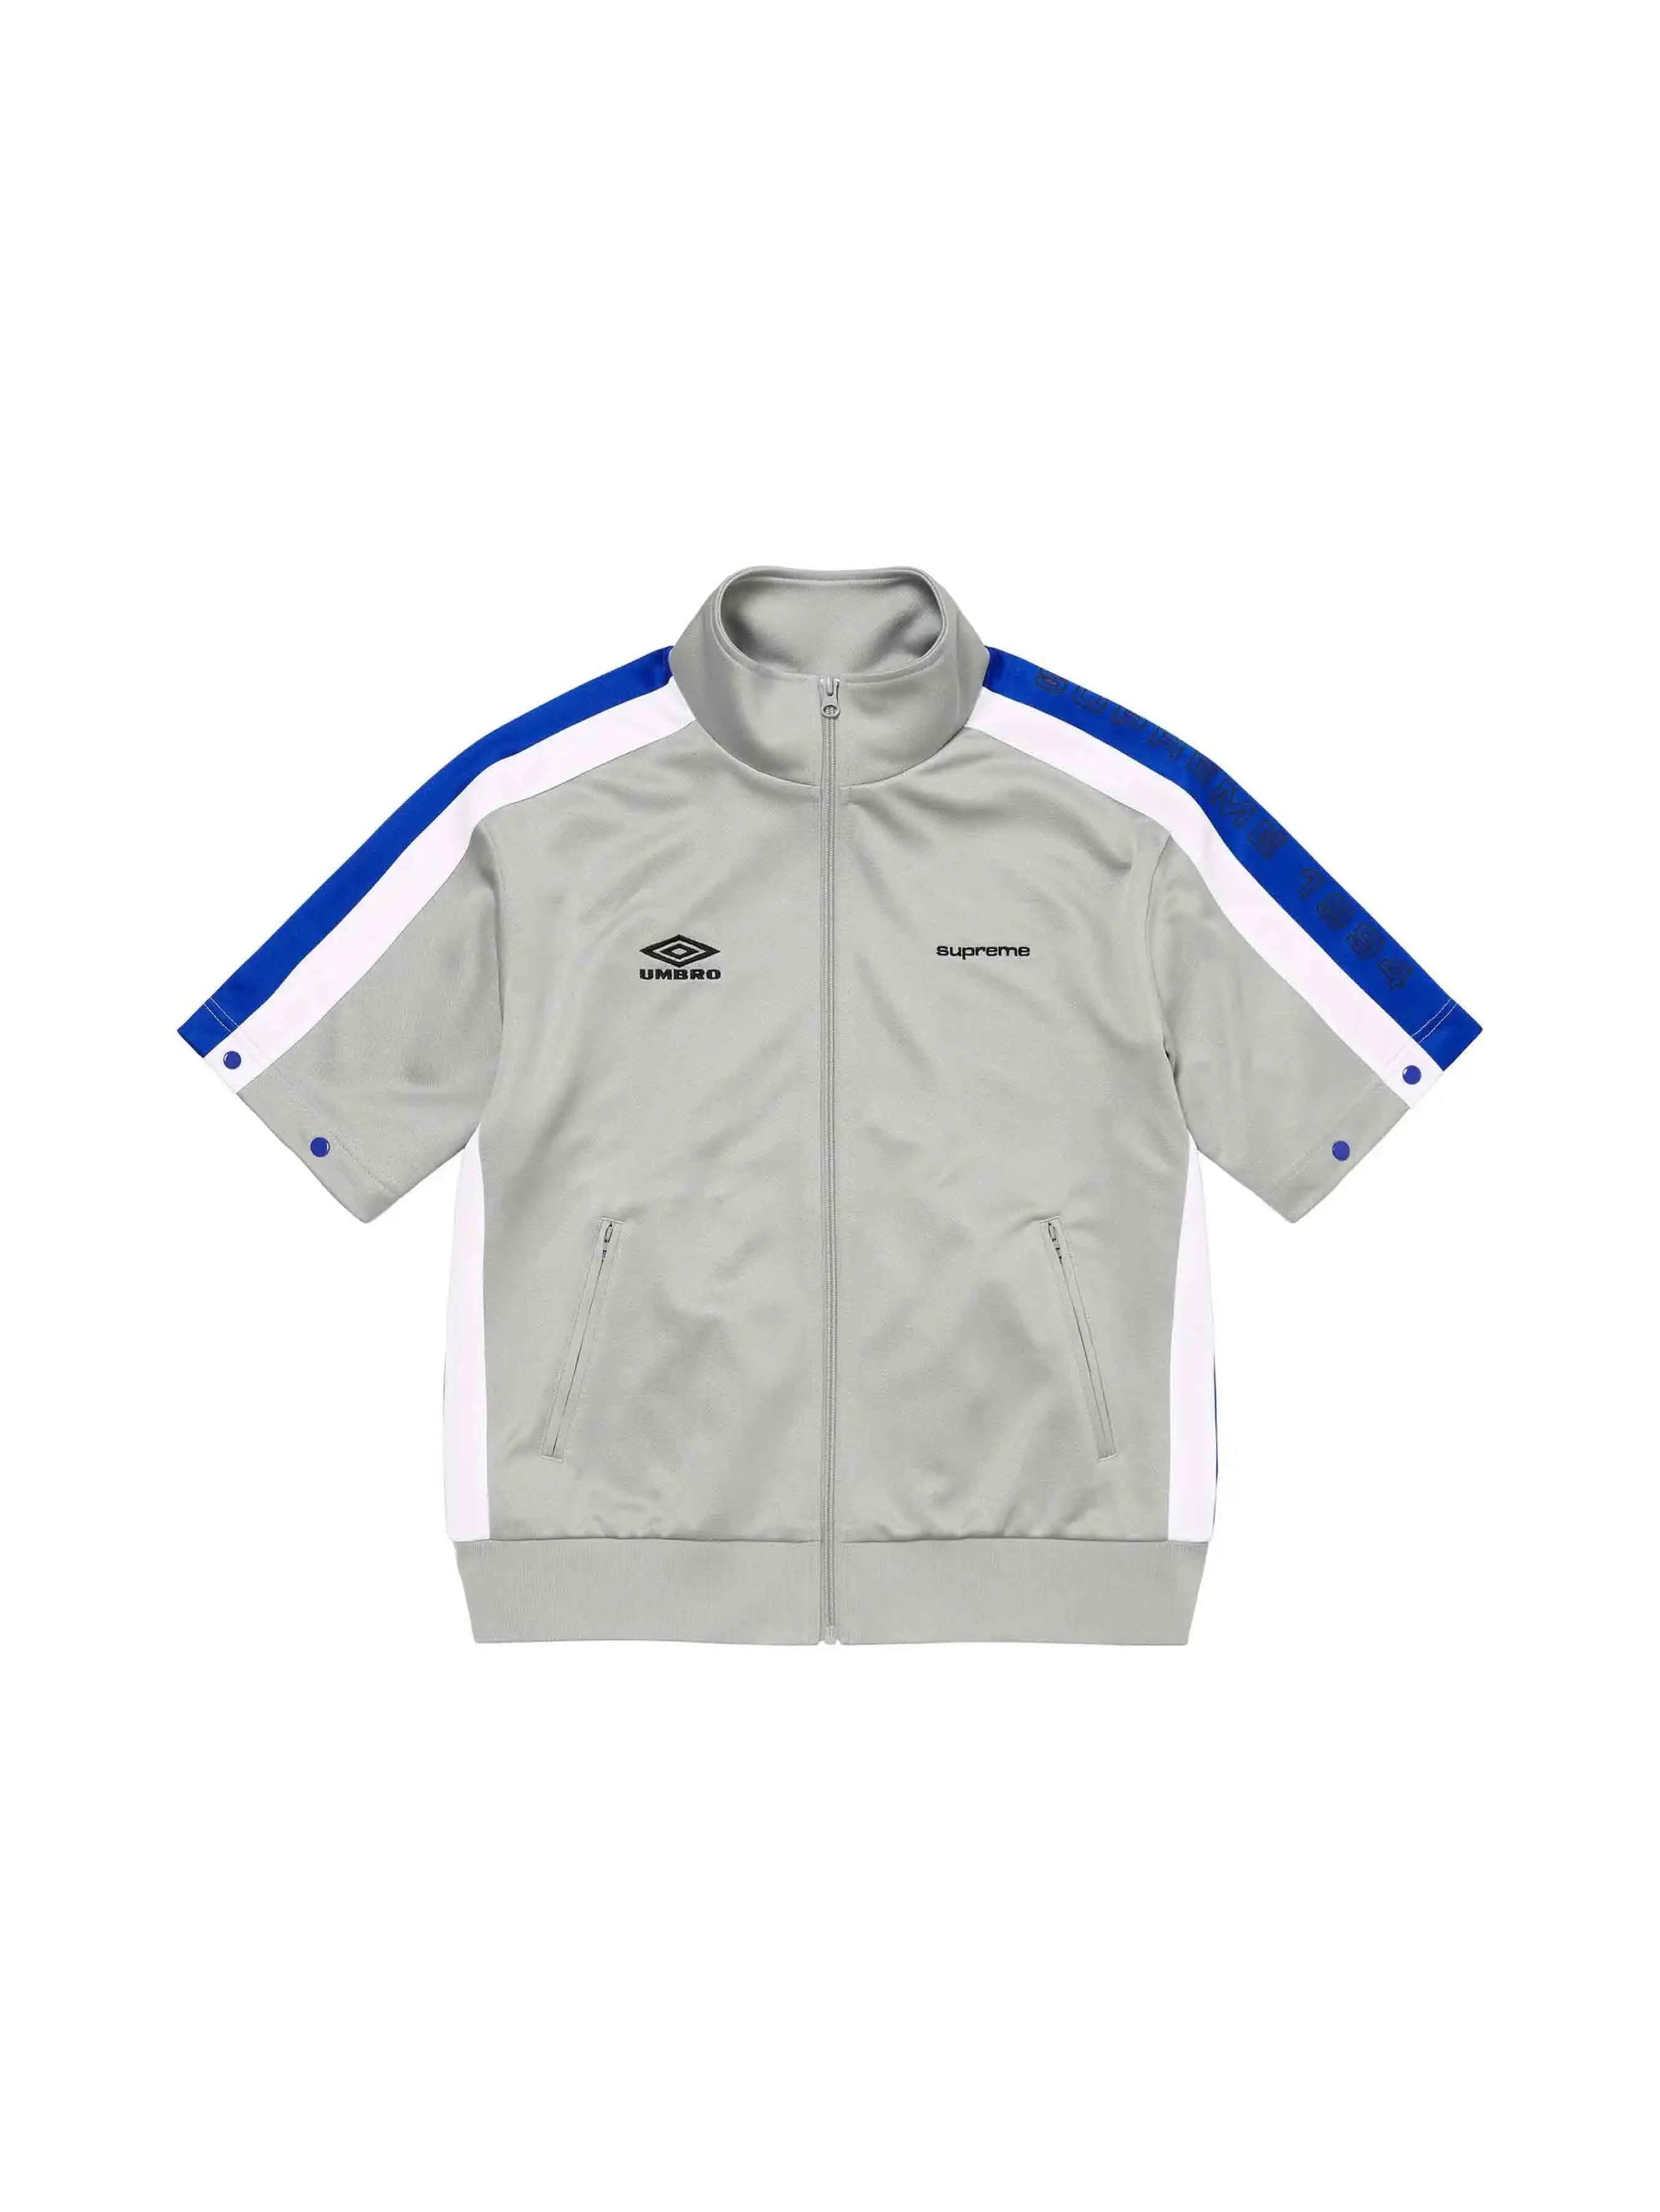 Supreme Umbro Snap Sleeve Jacket Light Grey in Auckland, New